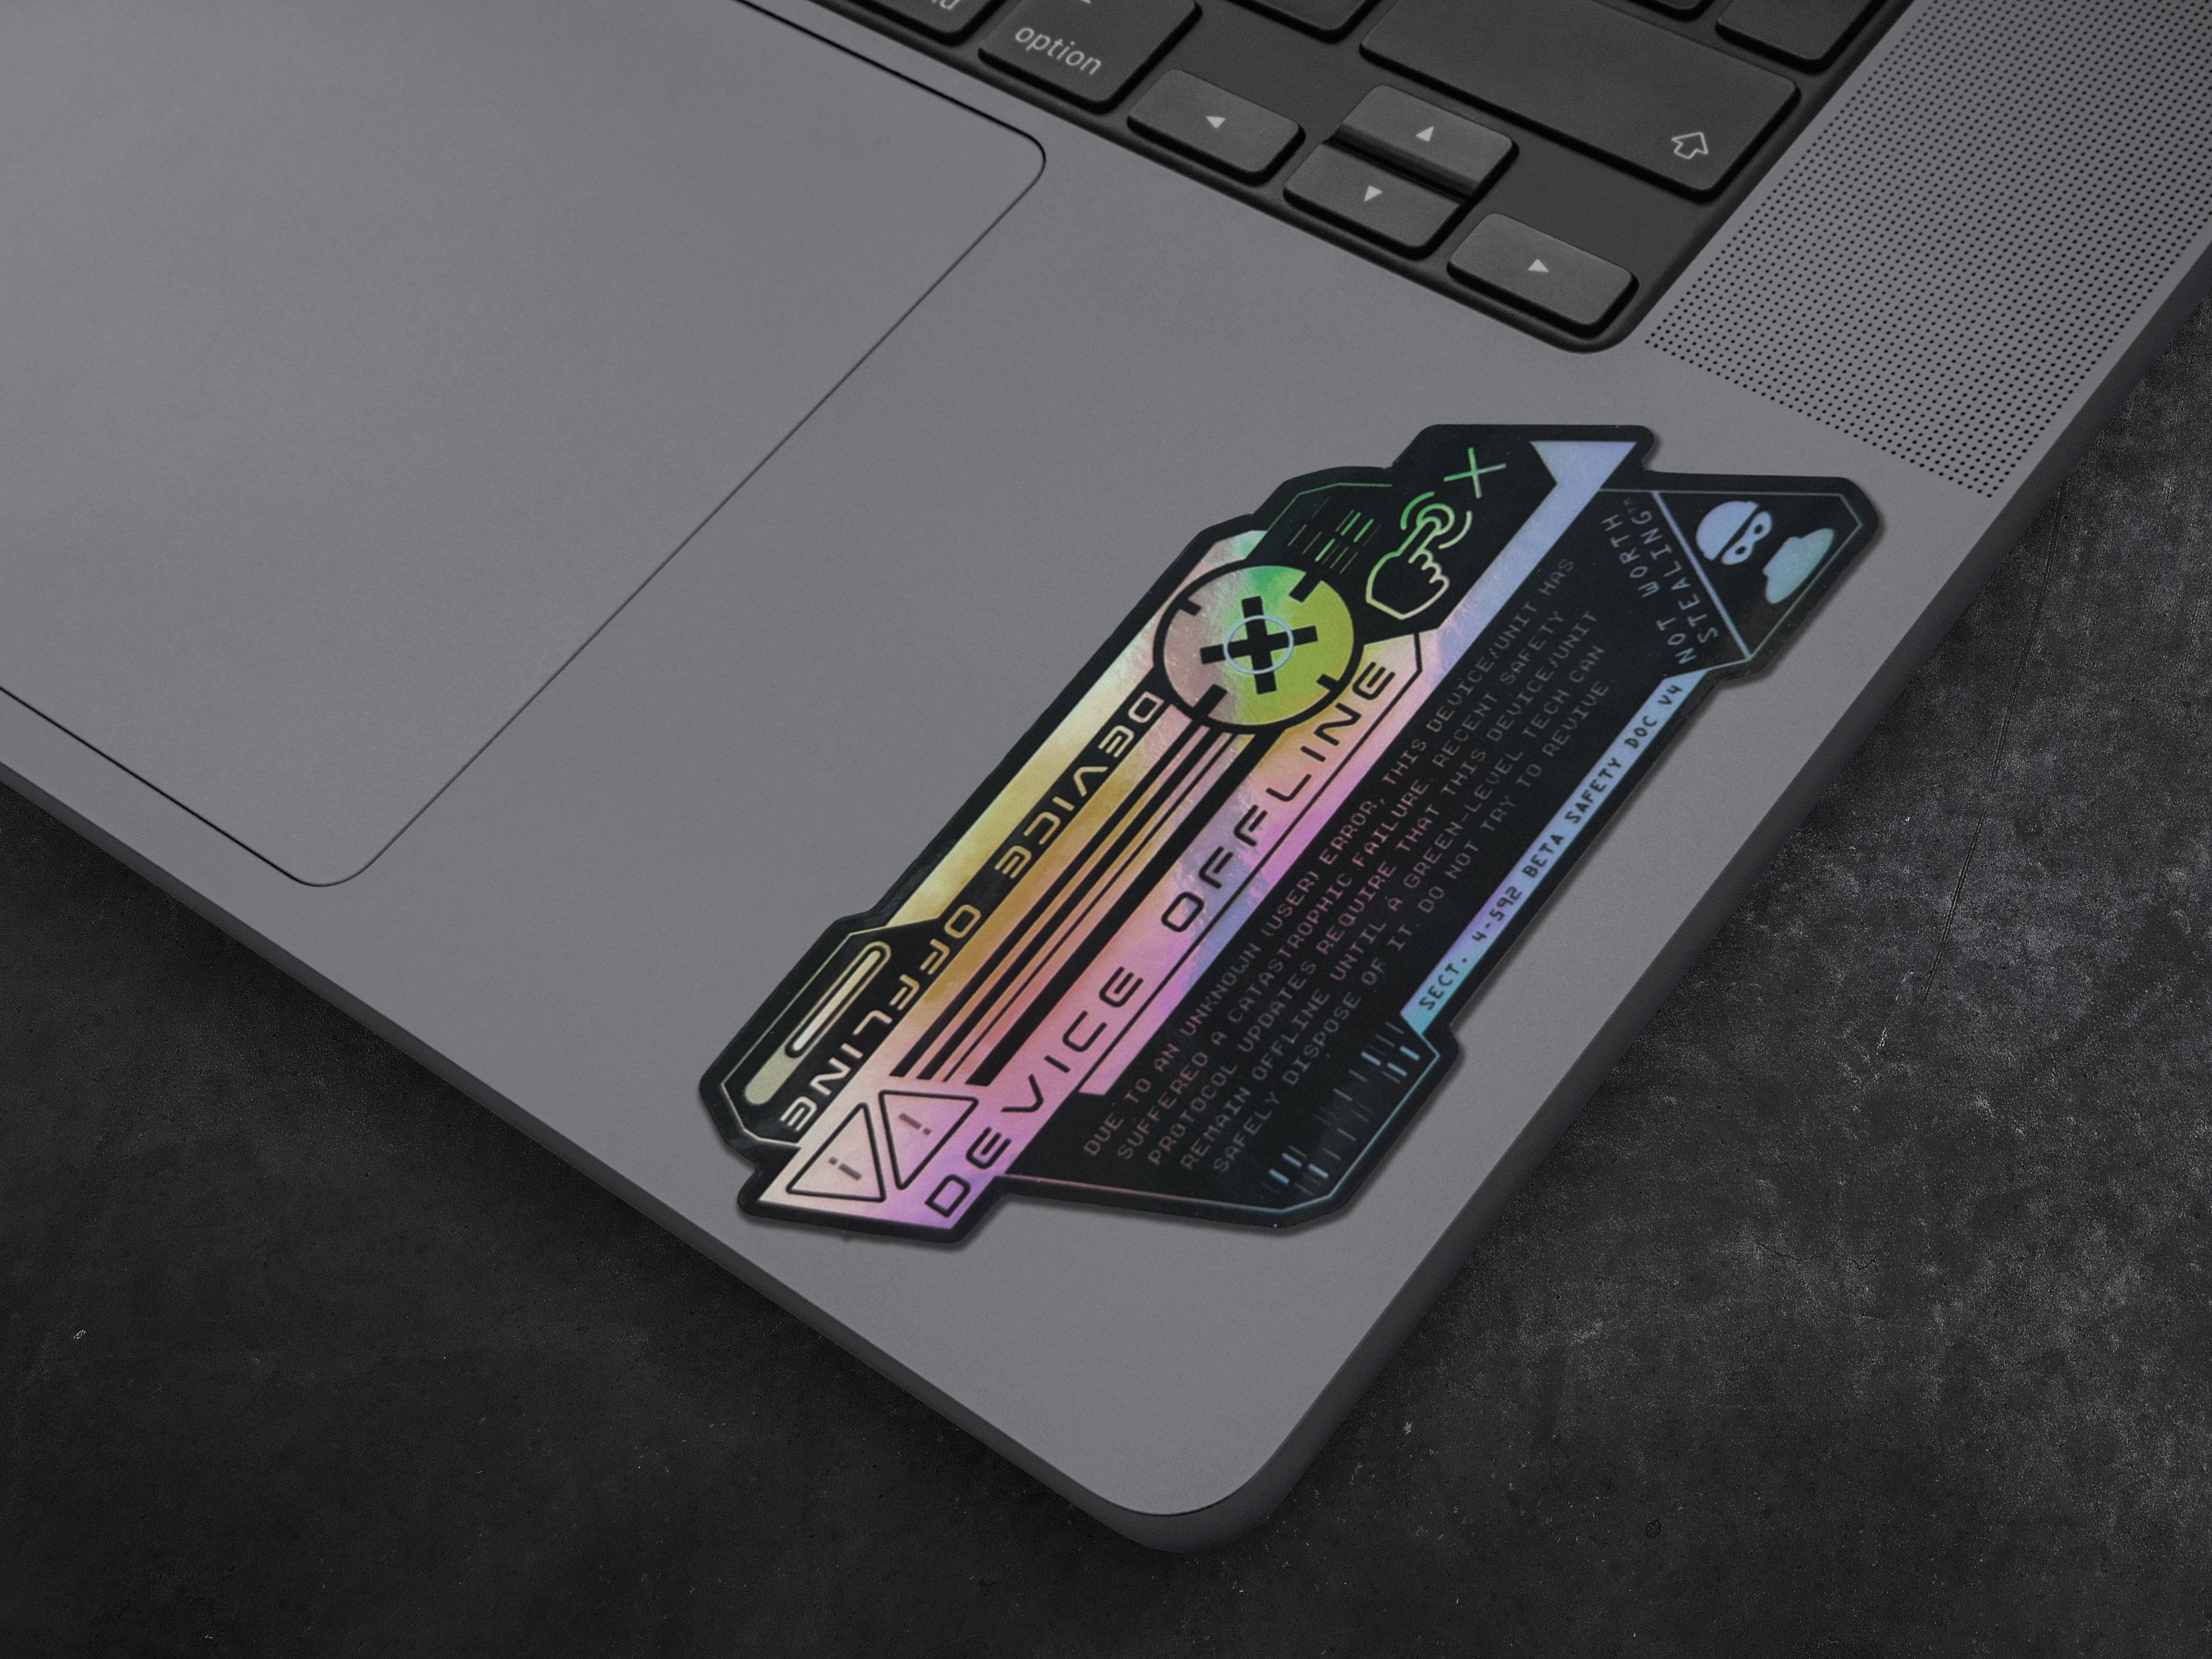 Device Offline Holographic Vinyl Decal - Manual Override Cyberpunk Laptop Sticker - Futuristic Astropunk / Space Sci-Fi Prop Decal by The Sciencey